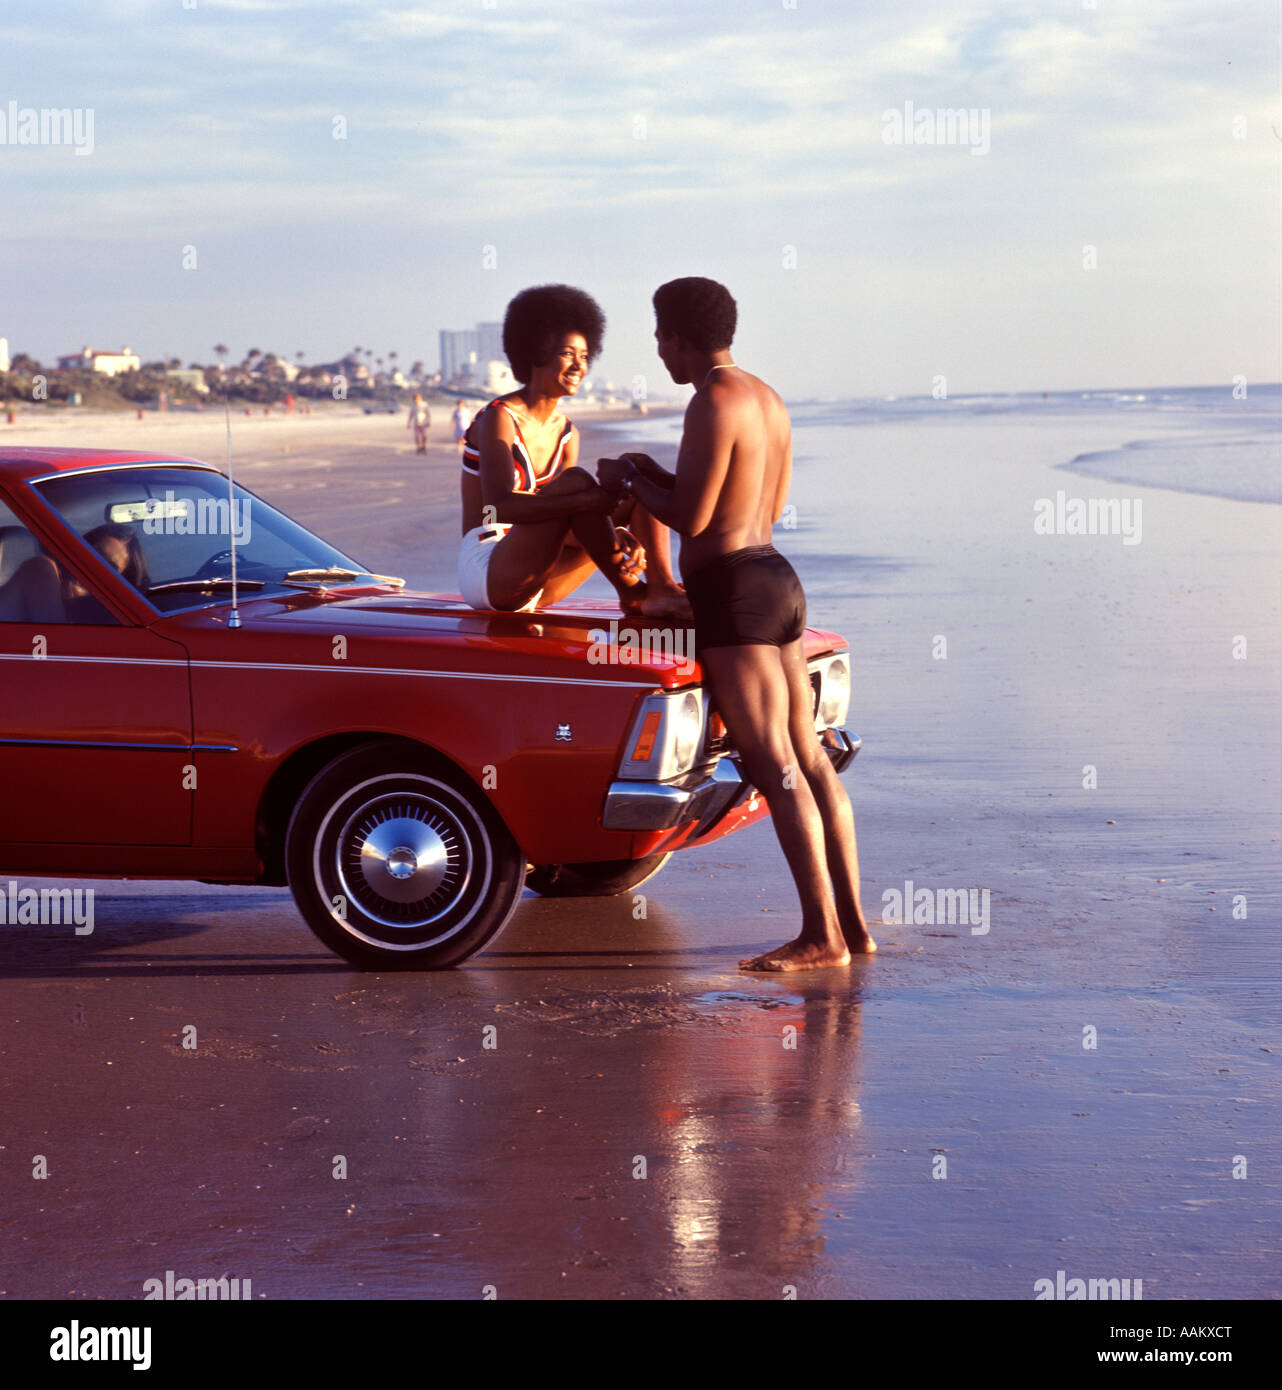 1970s SMILING ROMANTIC AFRICAN AMERICAN VACATION COUPLE AT BEACH WOMAN SITTING ON CAR HOOD MAN HOLDING HANDS Stock Photo